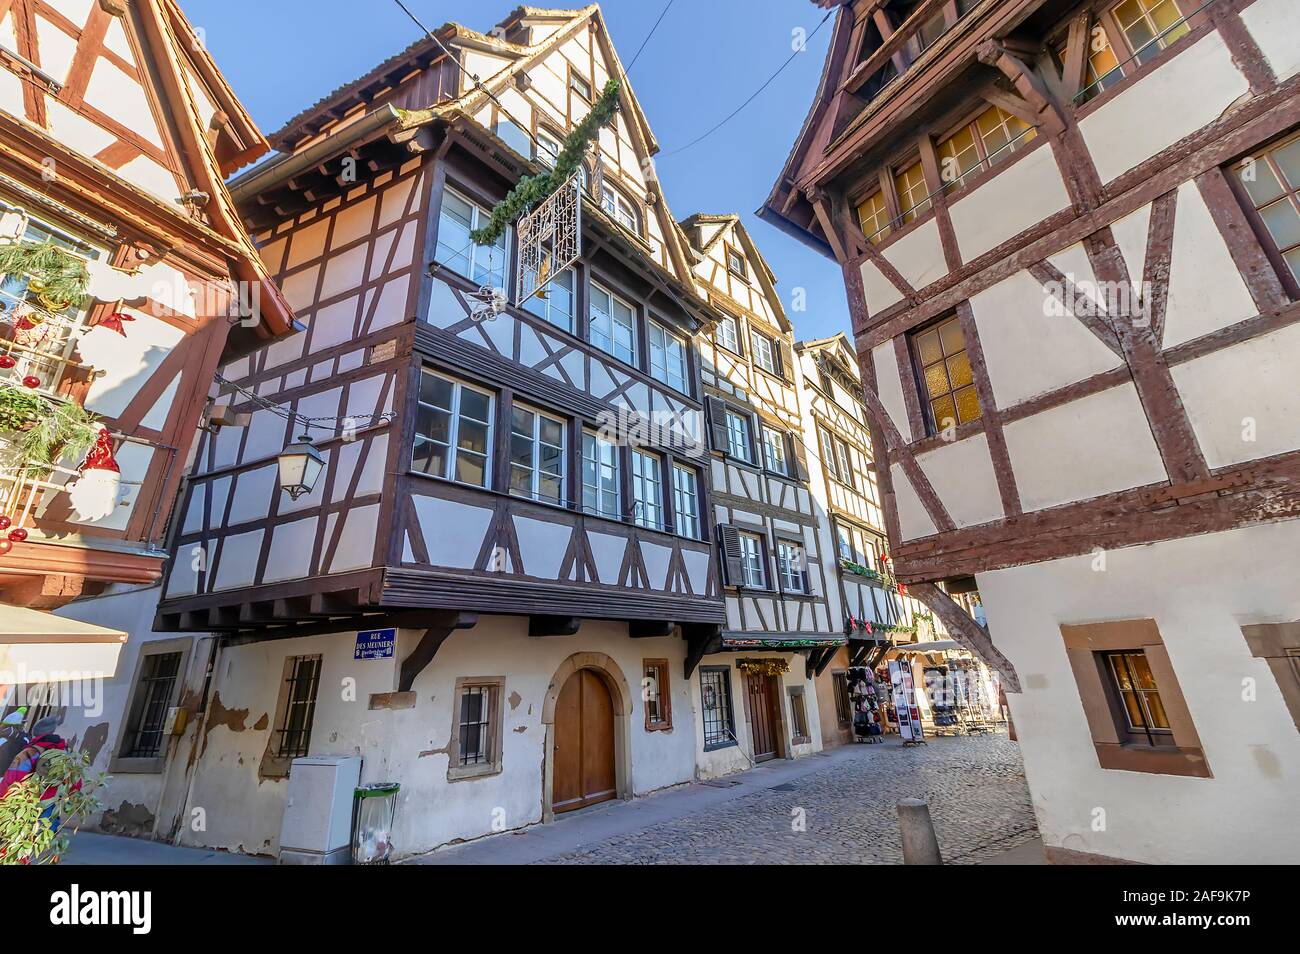 Traditional half-timbered houses in La Petite France, Strasbourg, Alsace, France Stock Photo